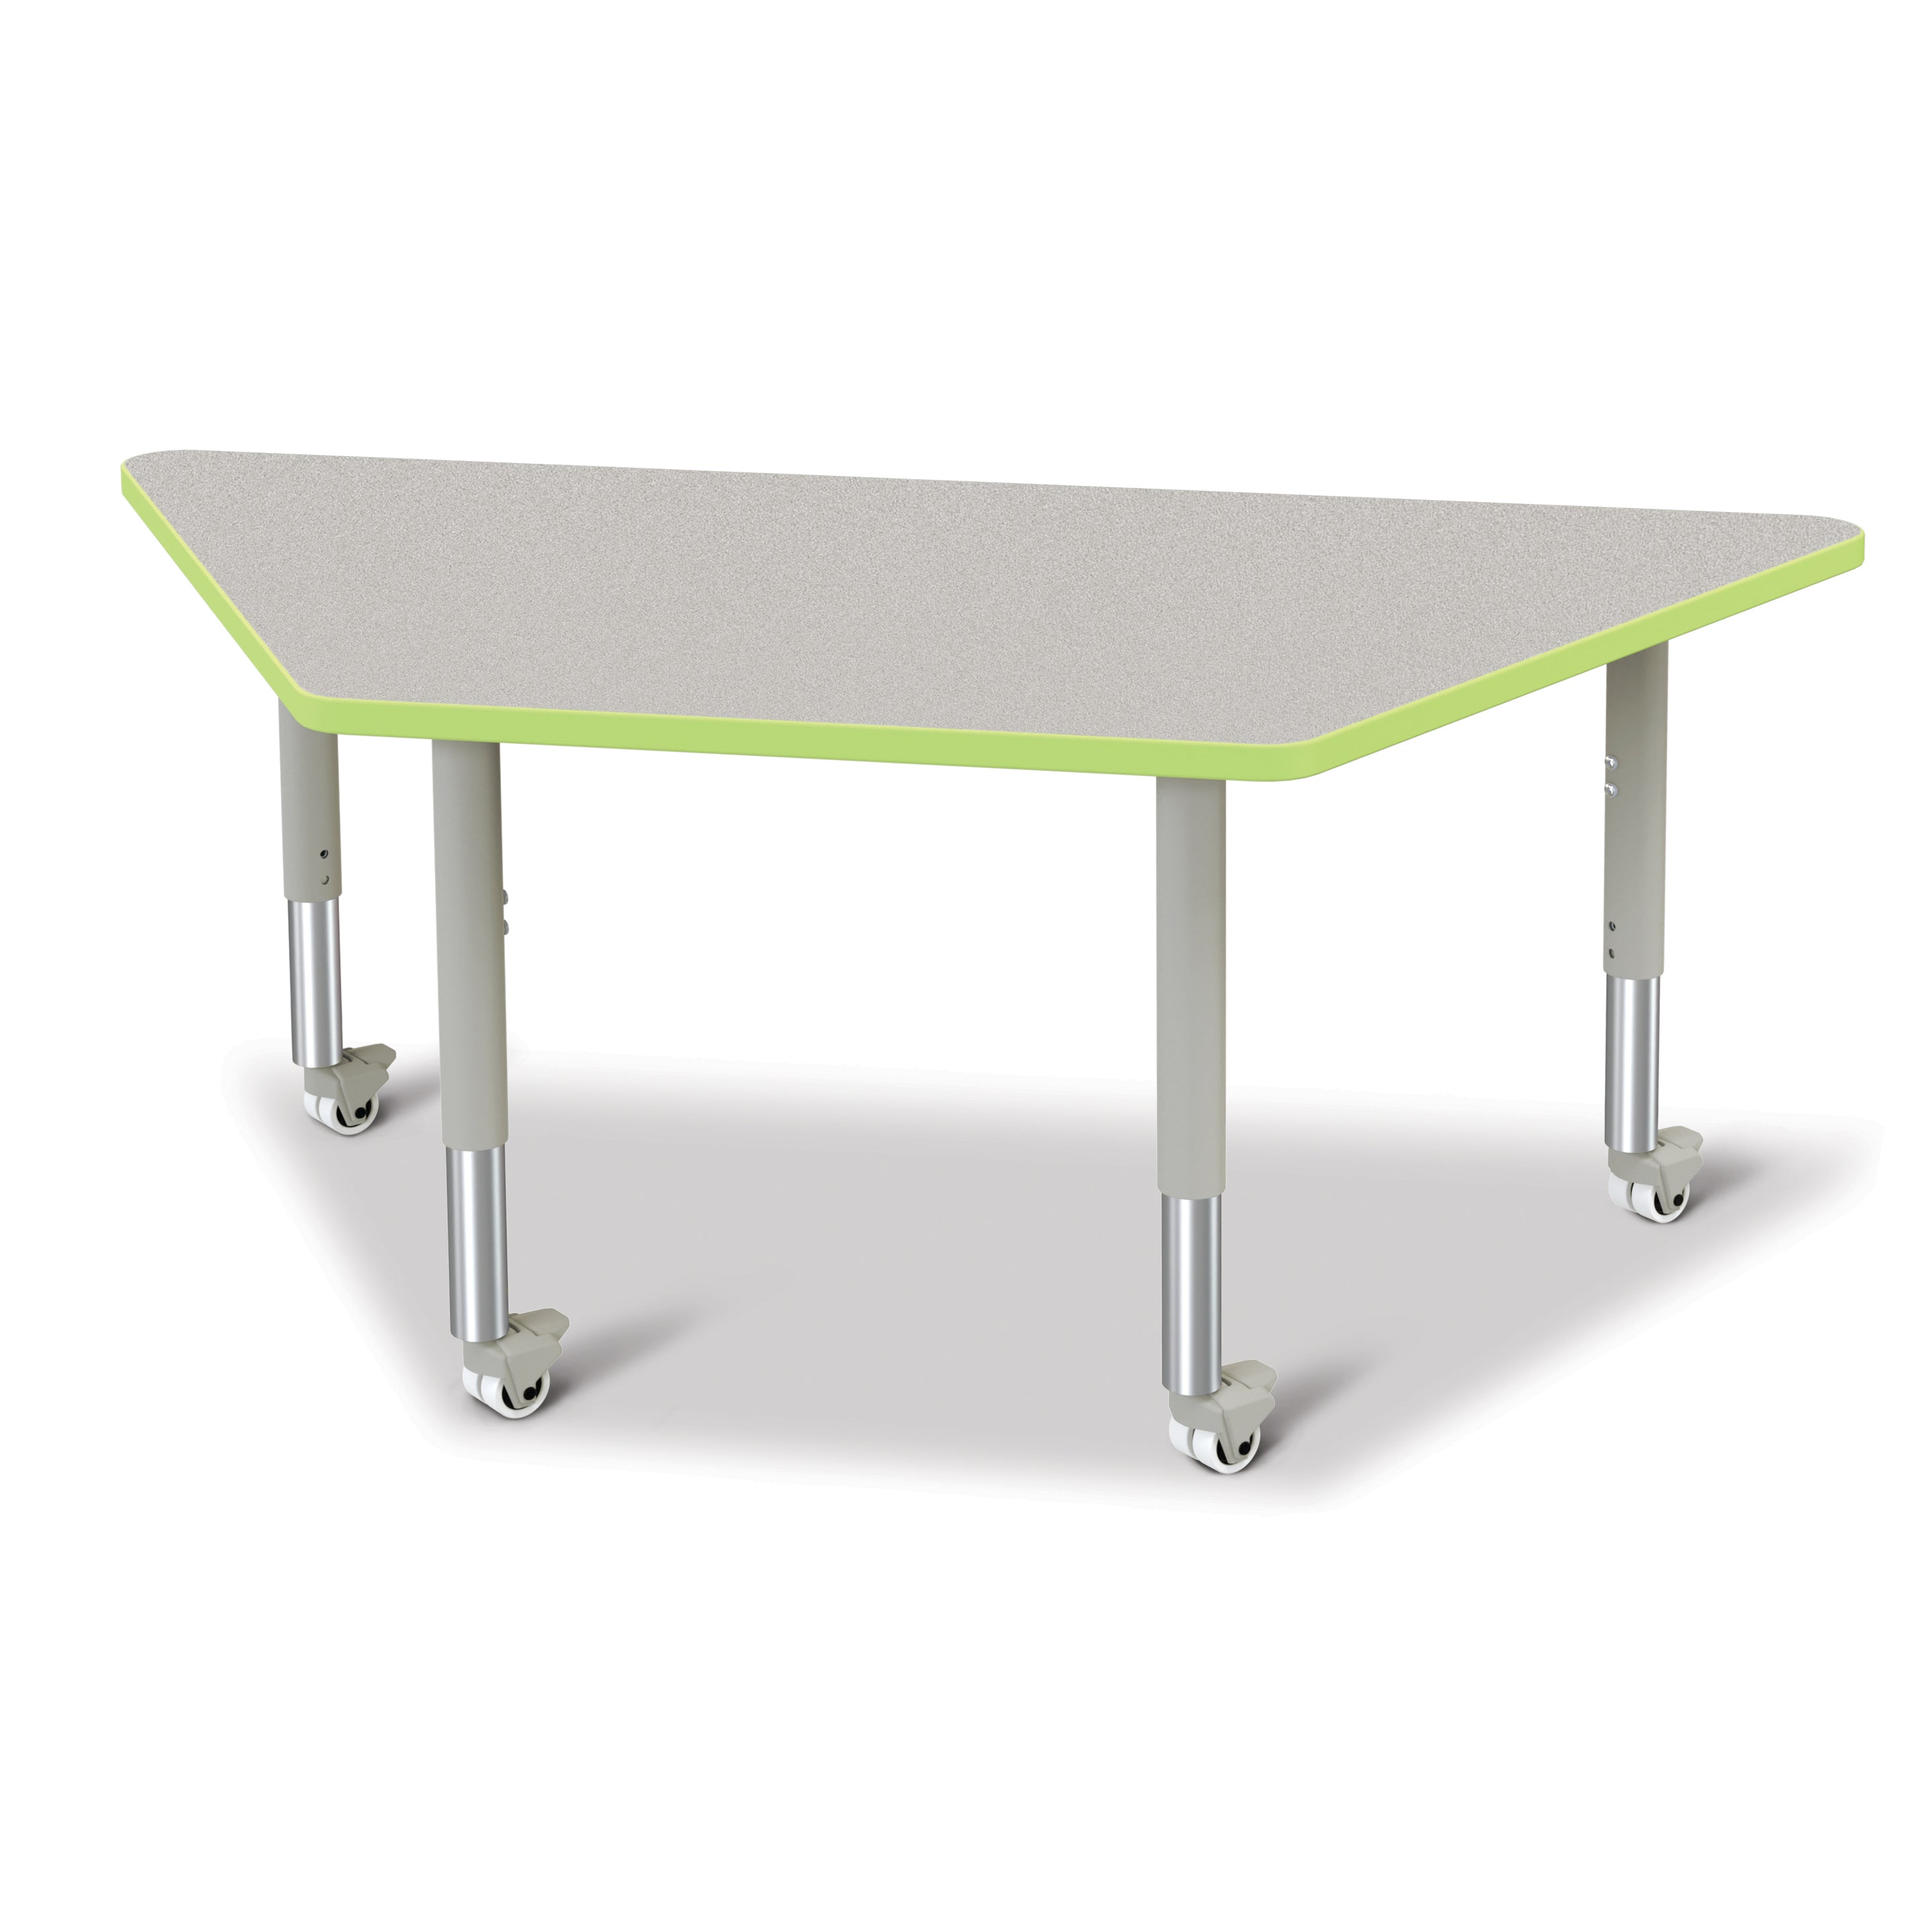 6443JCM130, Berries Trapezoid Activity Tables - 30" X 60", Mobile - Freckled Gray/Key Lime/Gray